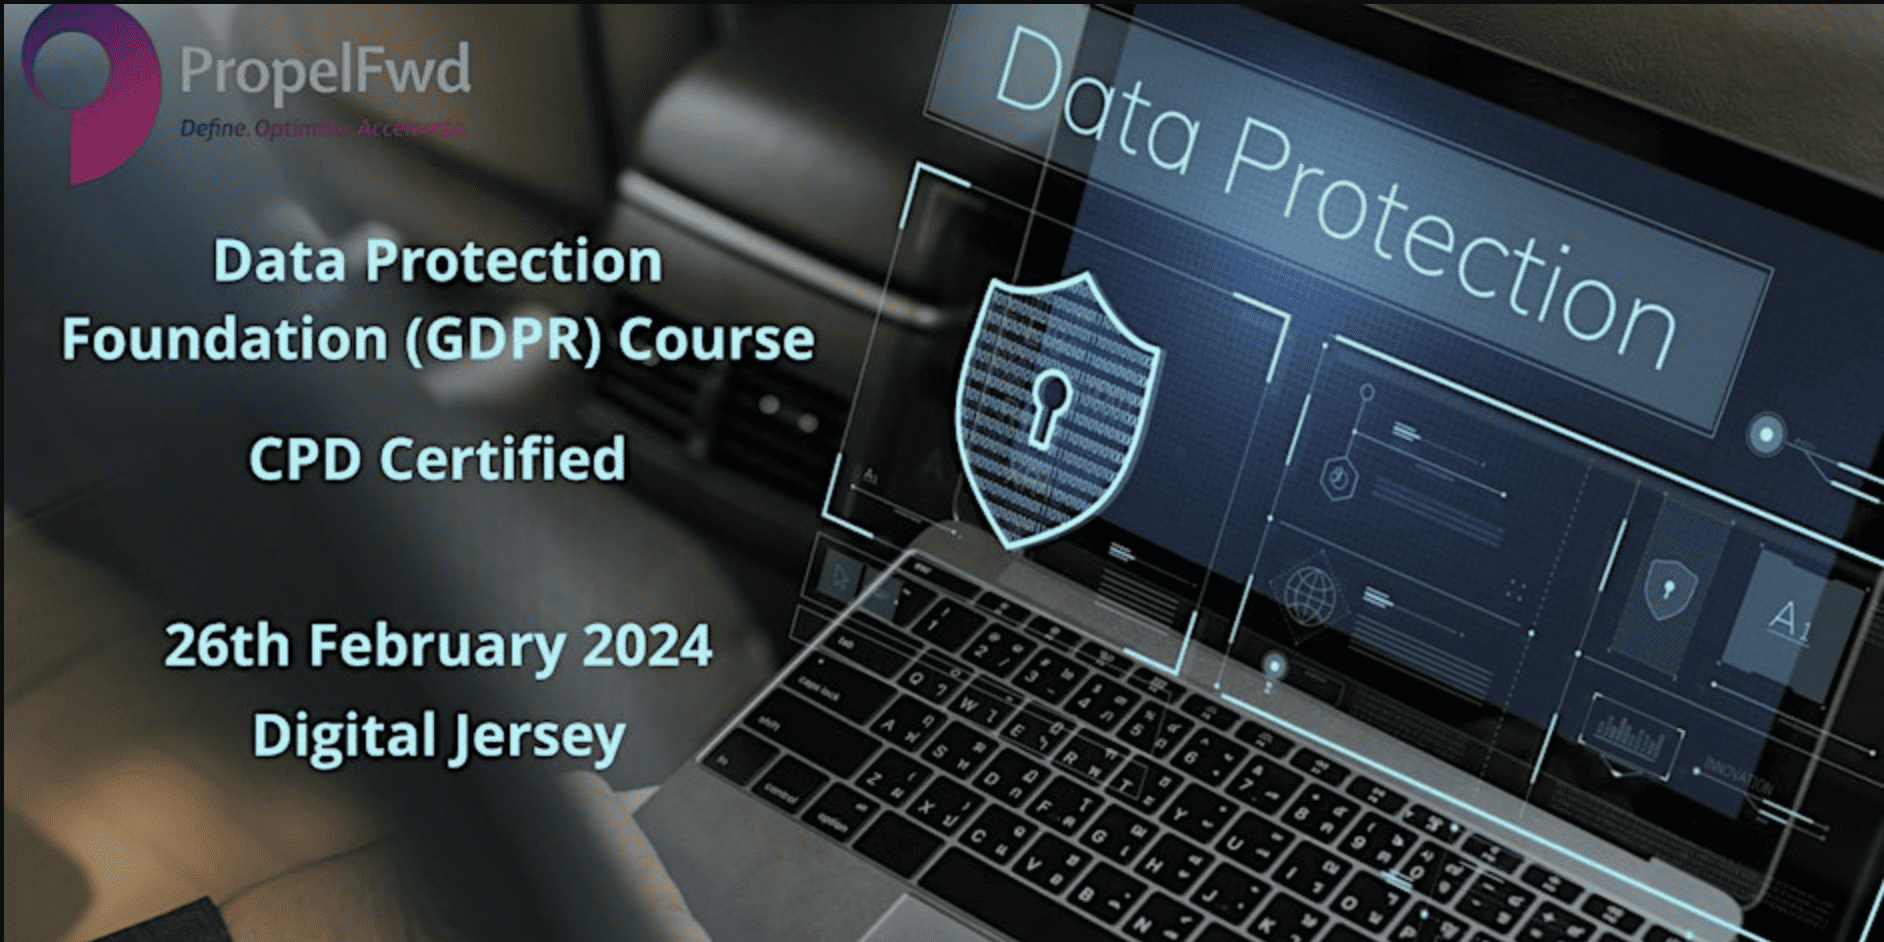 Data Protection foundation (GDPR) course – CPD certified £479.00